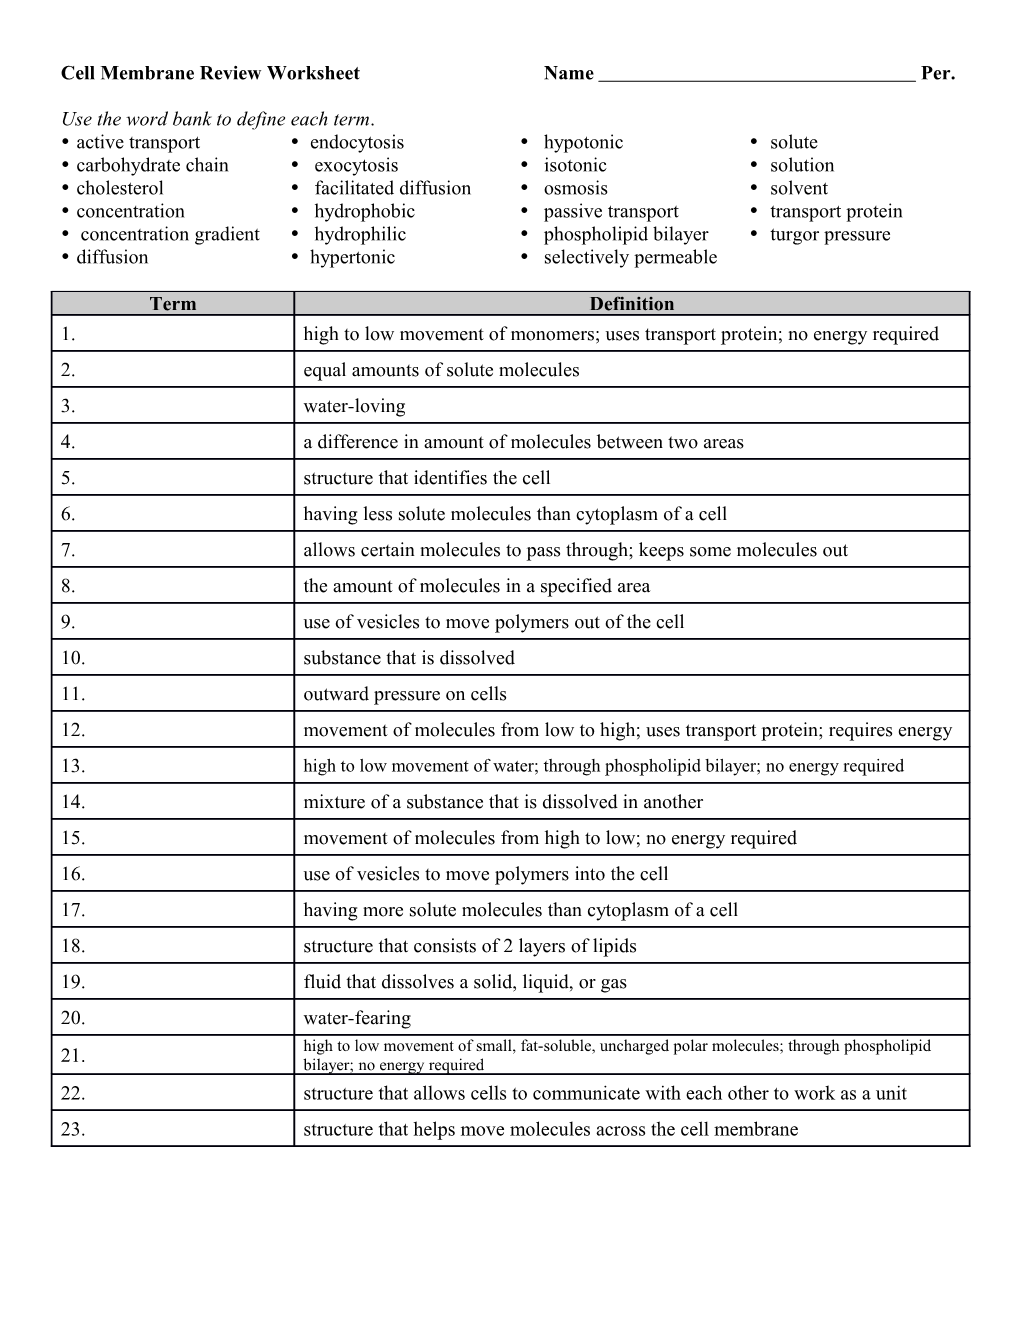 Cell Membrane Review Worksheet